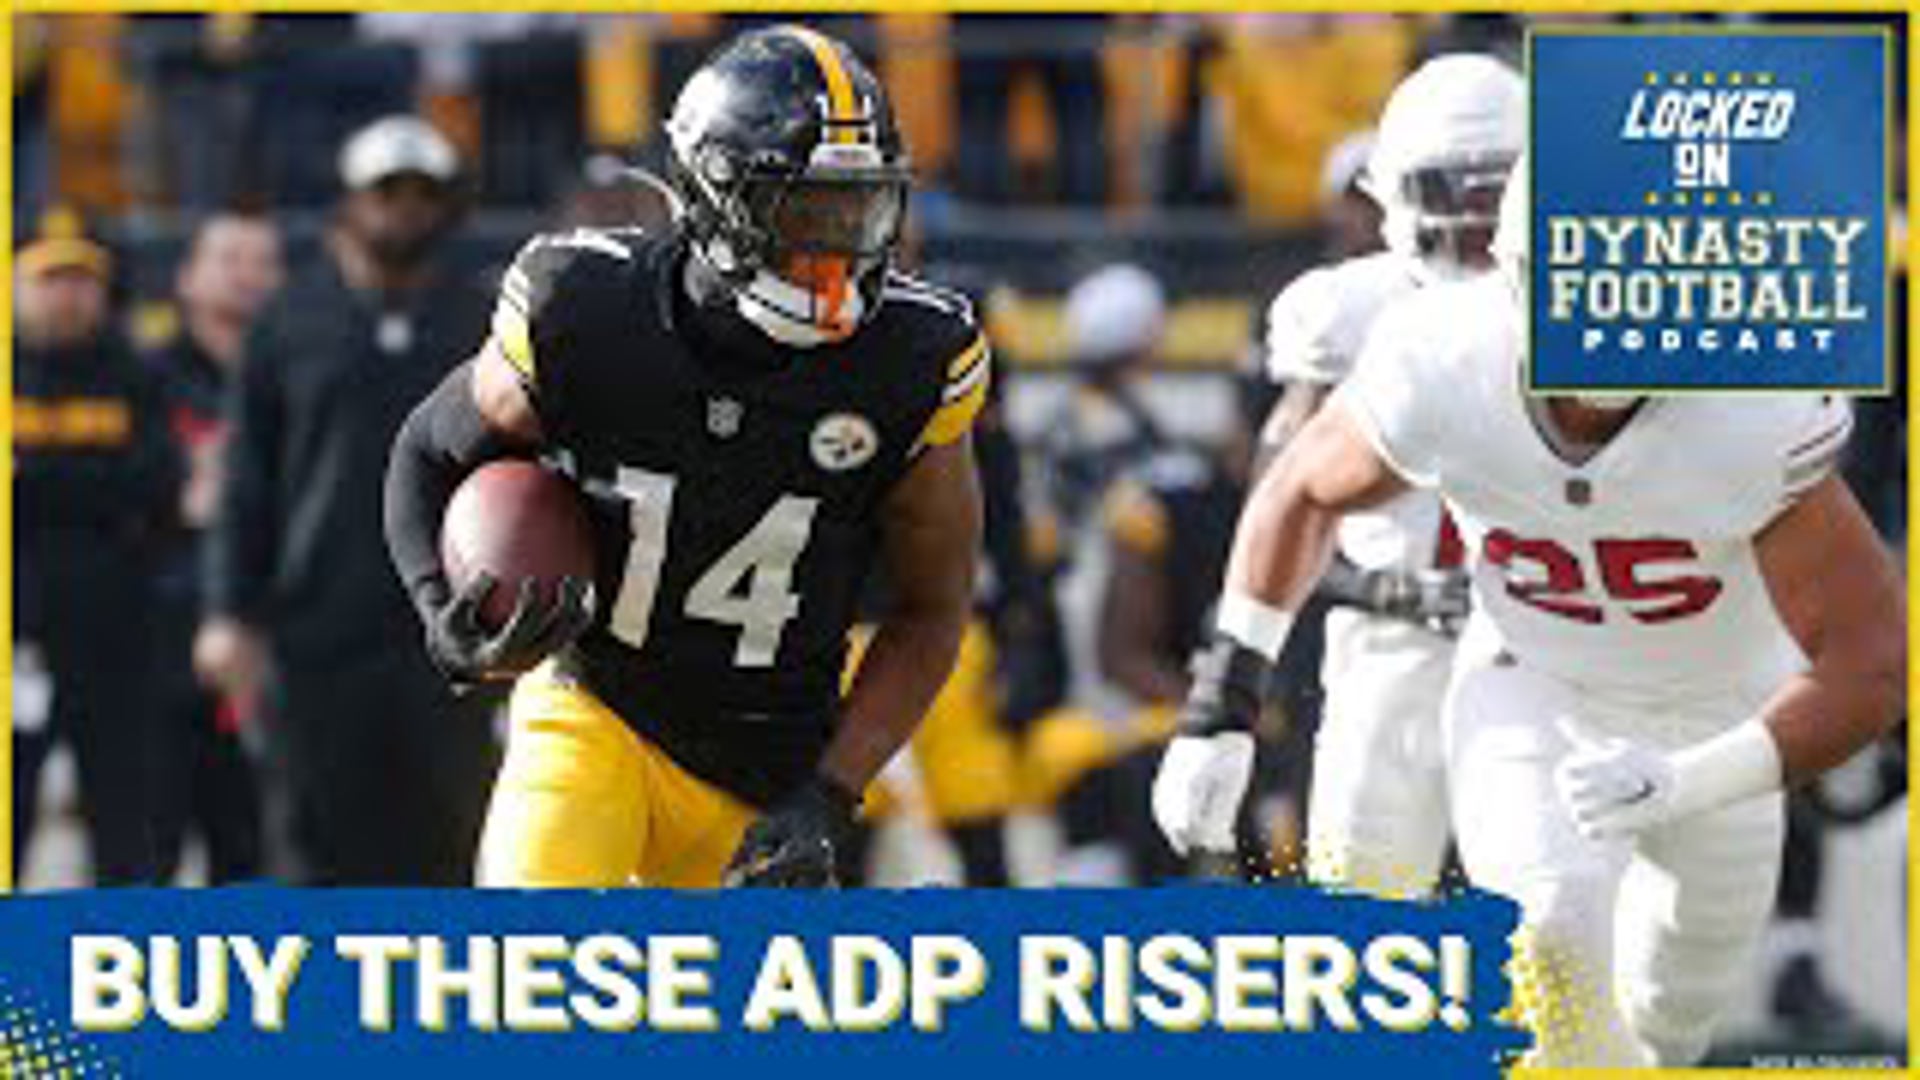 Steelers WR George Pickens has seen his ADP rise by nearly 20 spots over the last month. Could he be a No. 1 receiver this year in fantasy football?